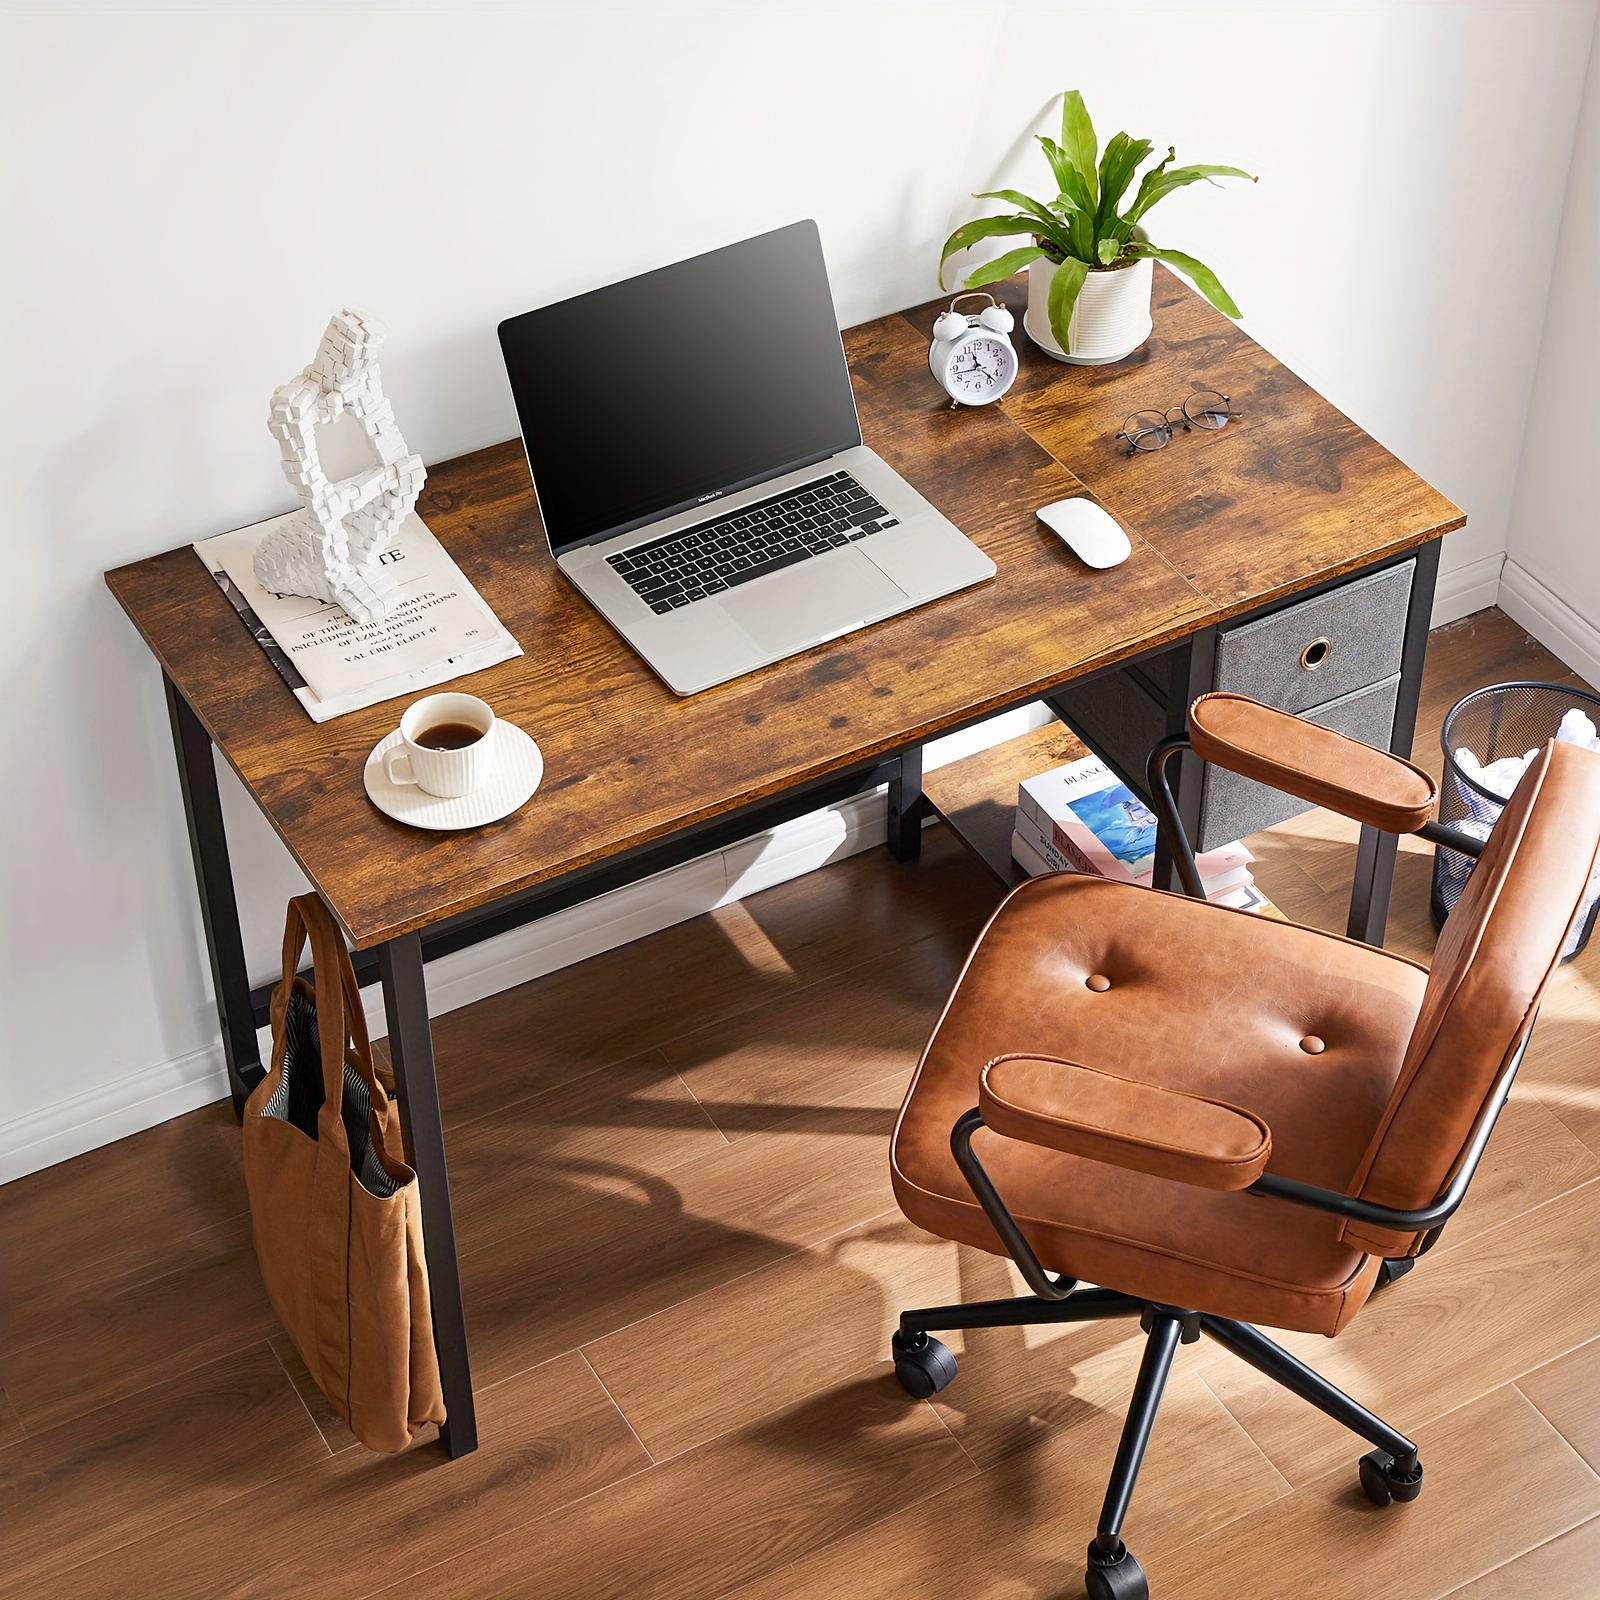 

Computer Desk, 40 Inch Modern Simple Style Desk With Storage Drawers, Small Office Writing Study Pc Work Table For Home Bedroom, Rustic Wood